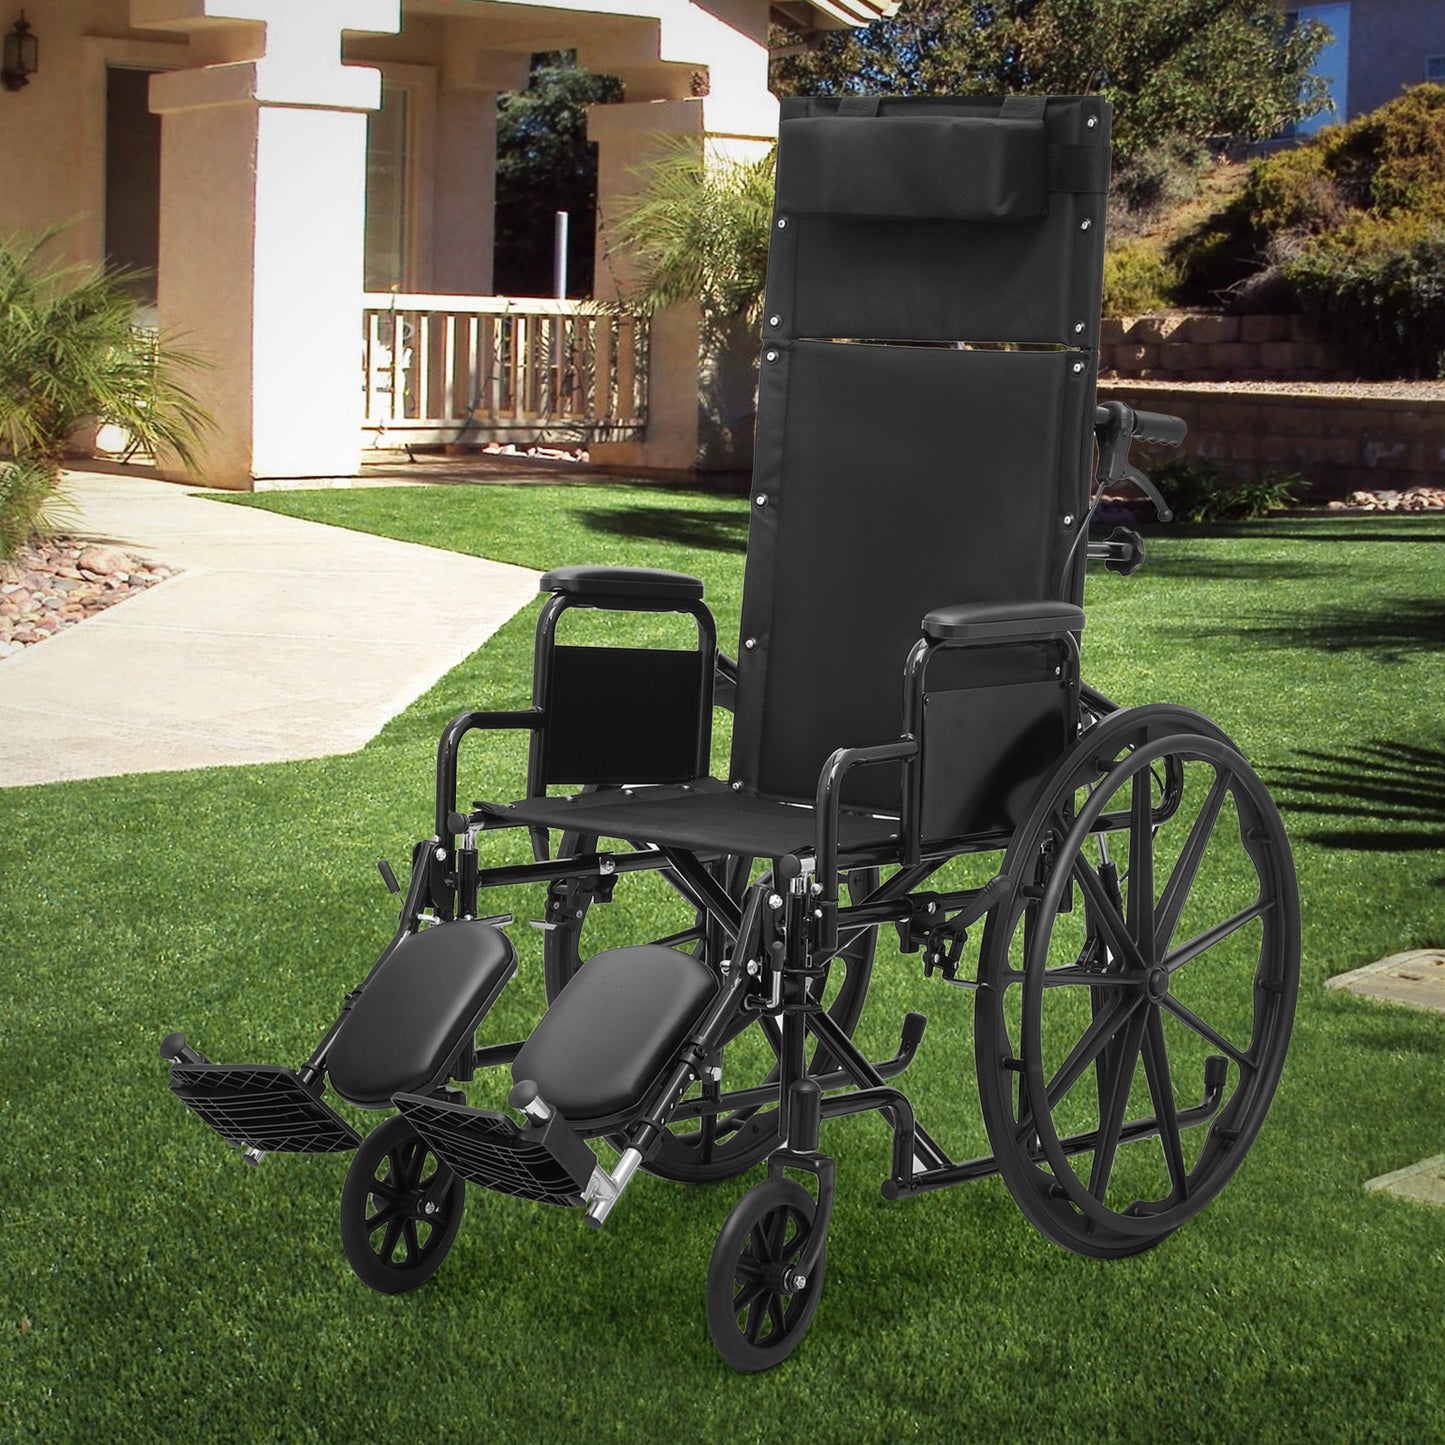 Reclinable Transport Wheelchair - FDA Aproved - 18.5"x16" Seat